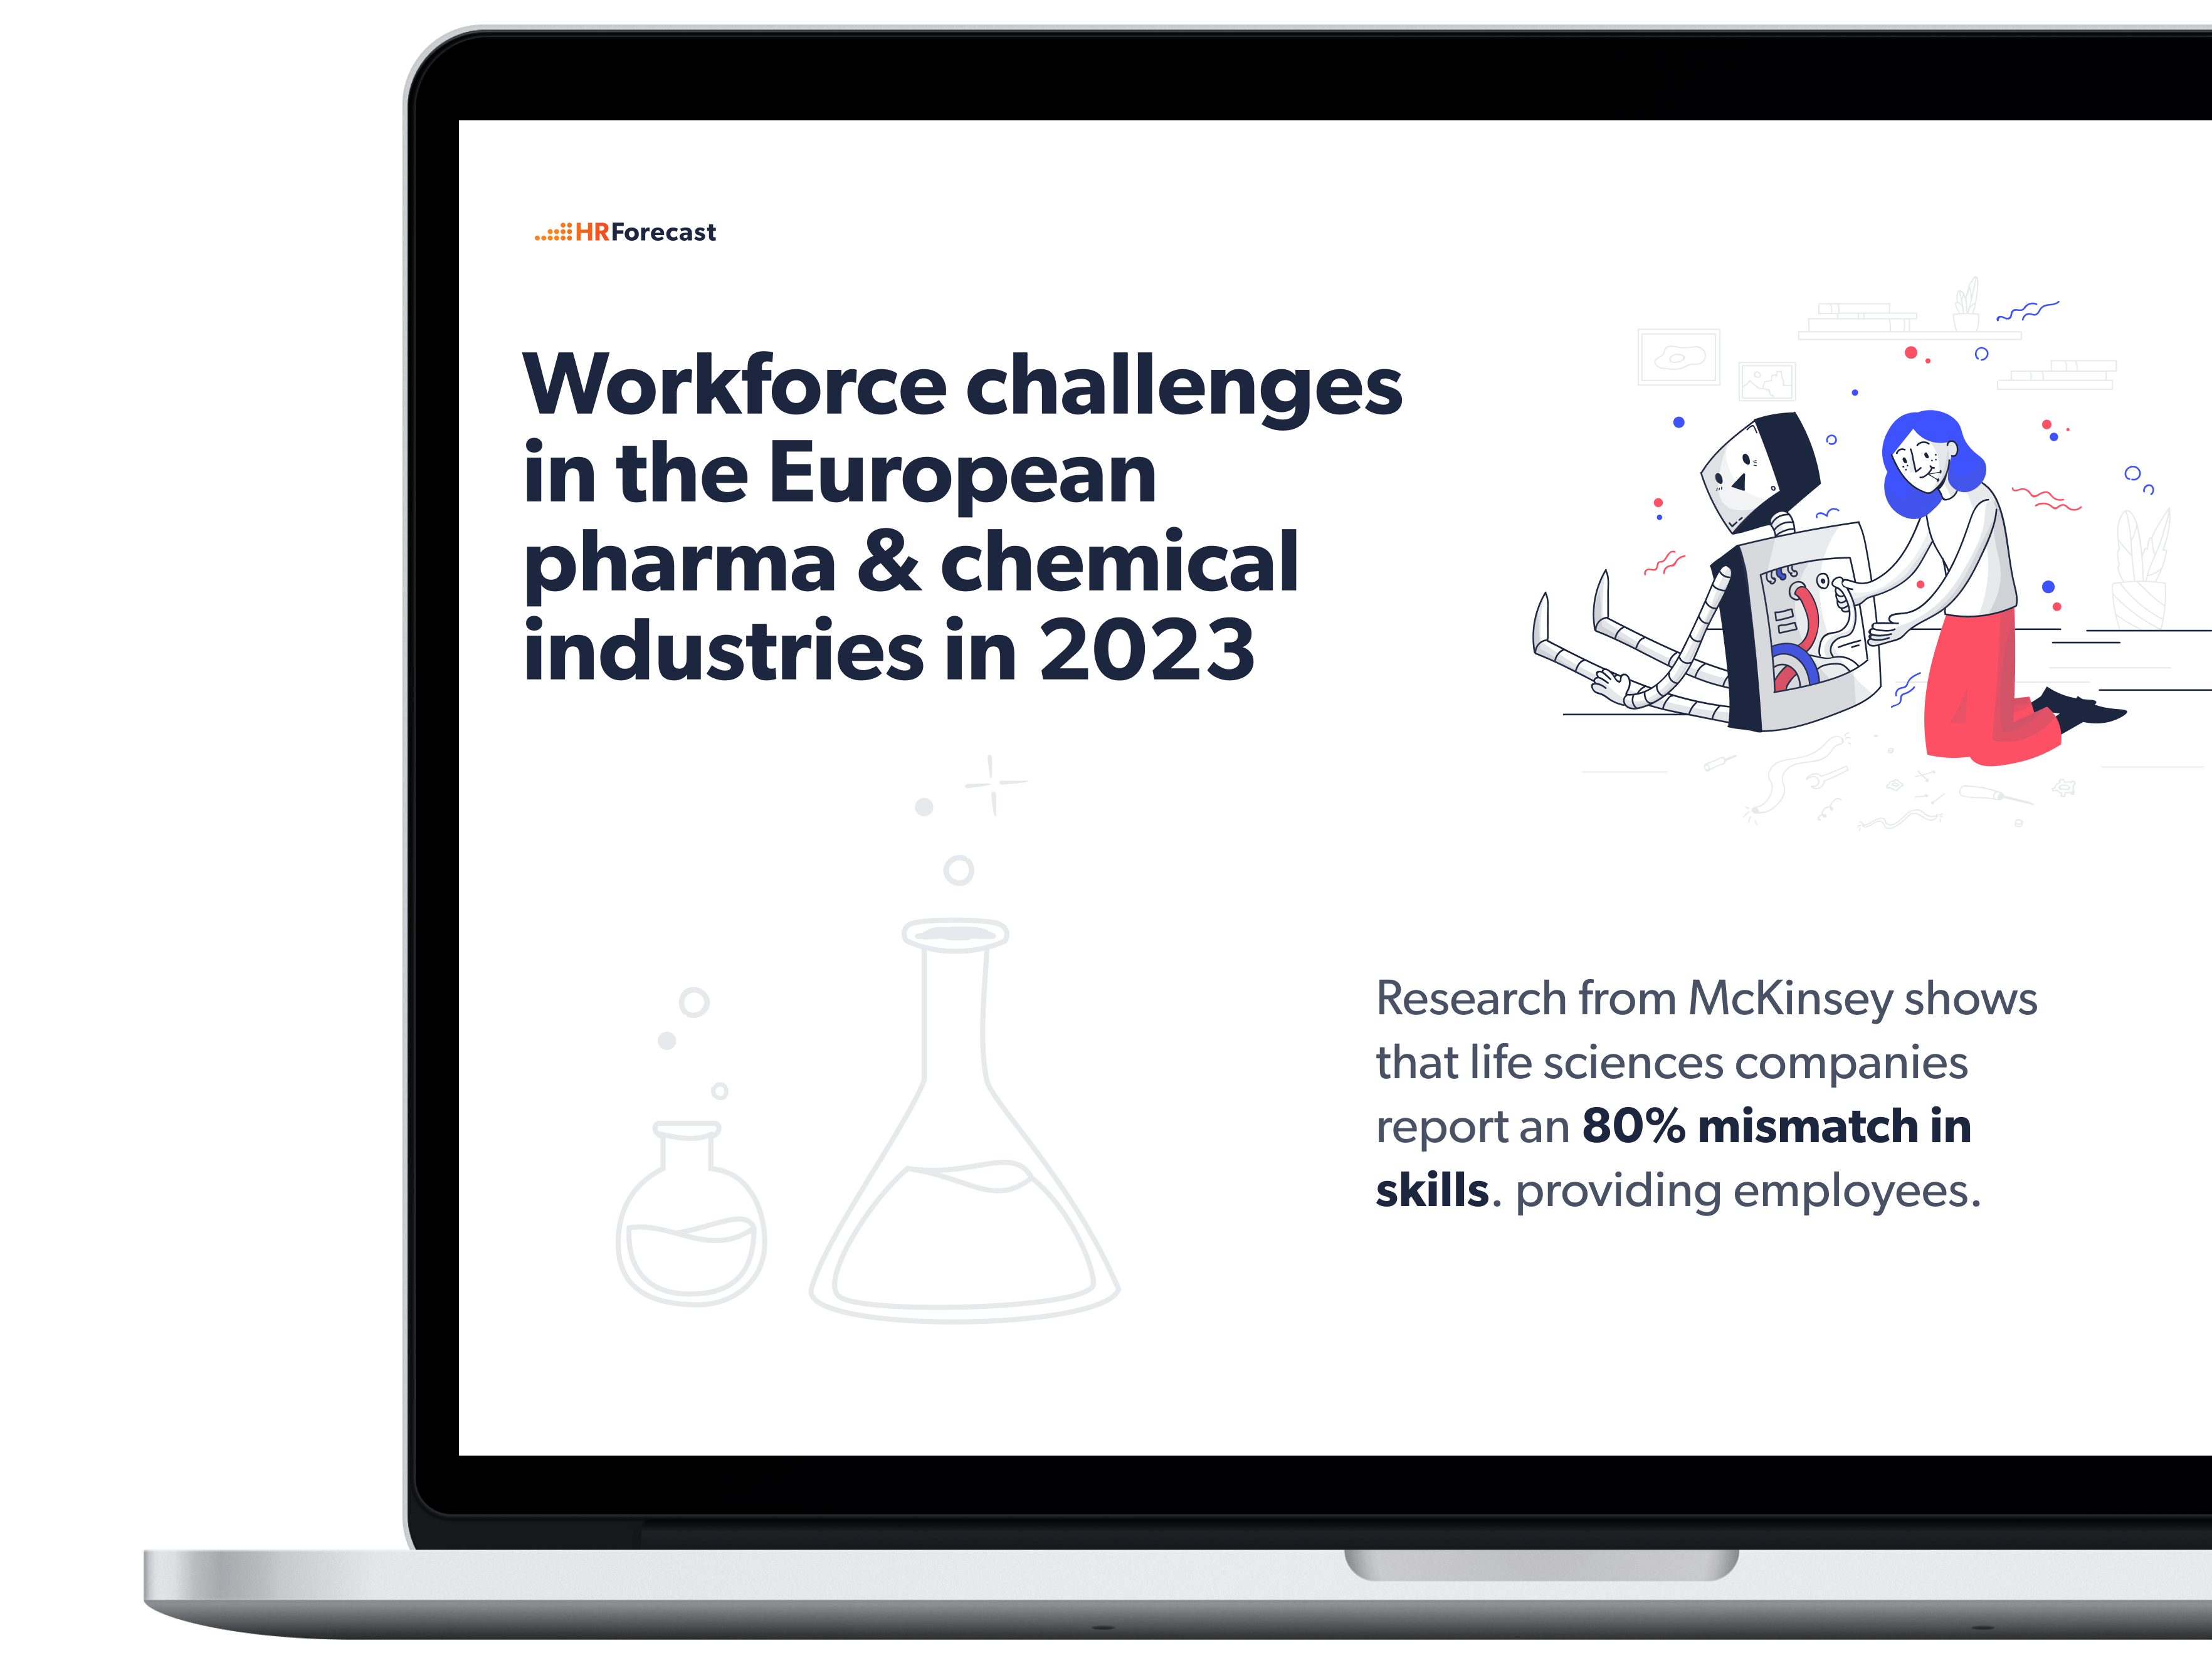 Workforce challenges in the pharma & chemical industries